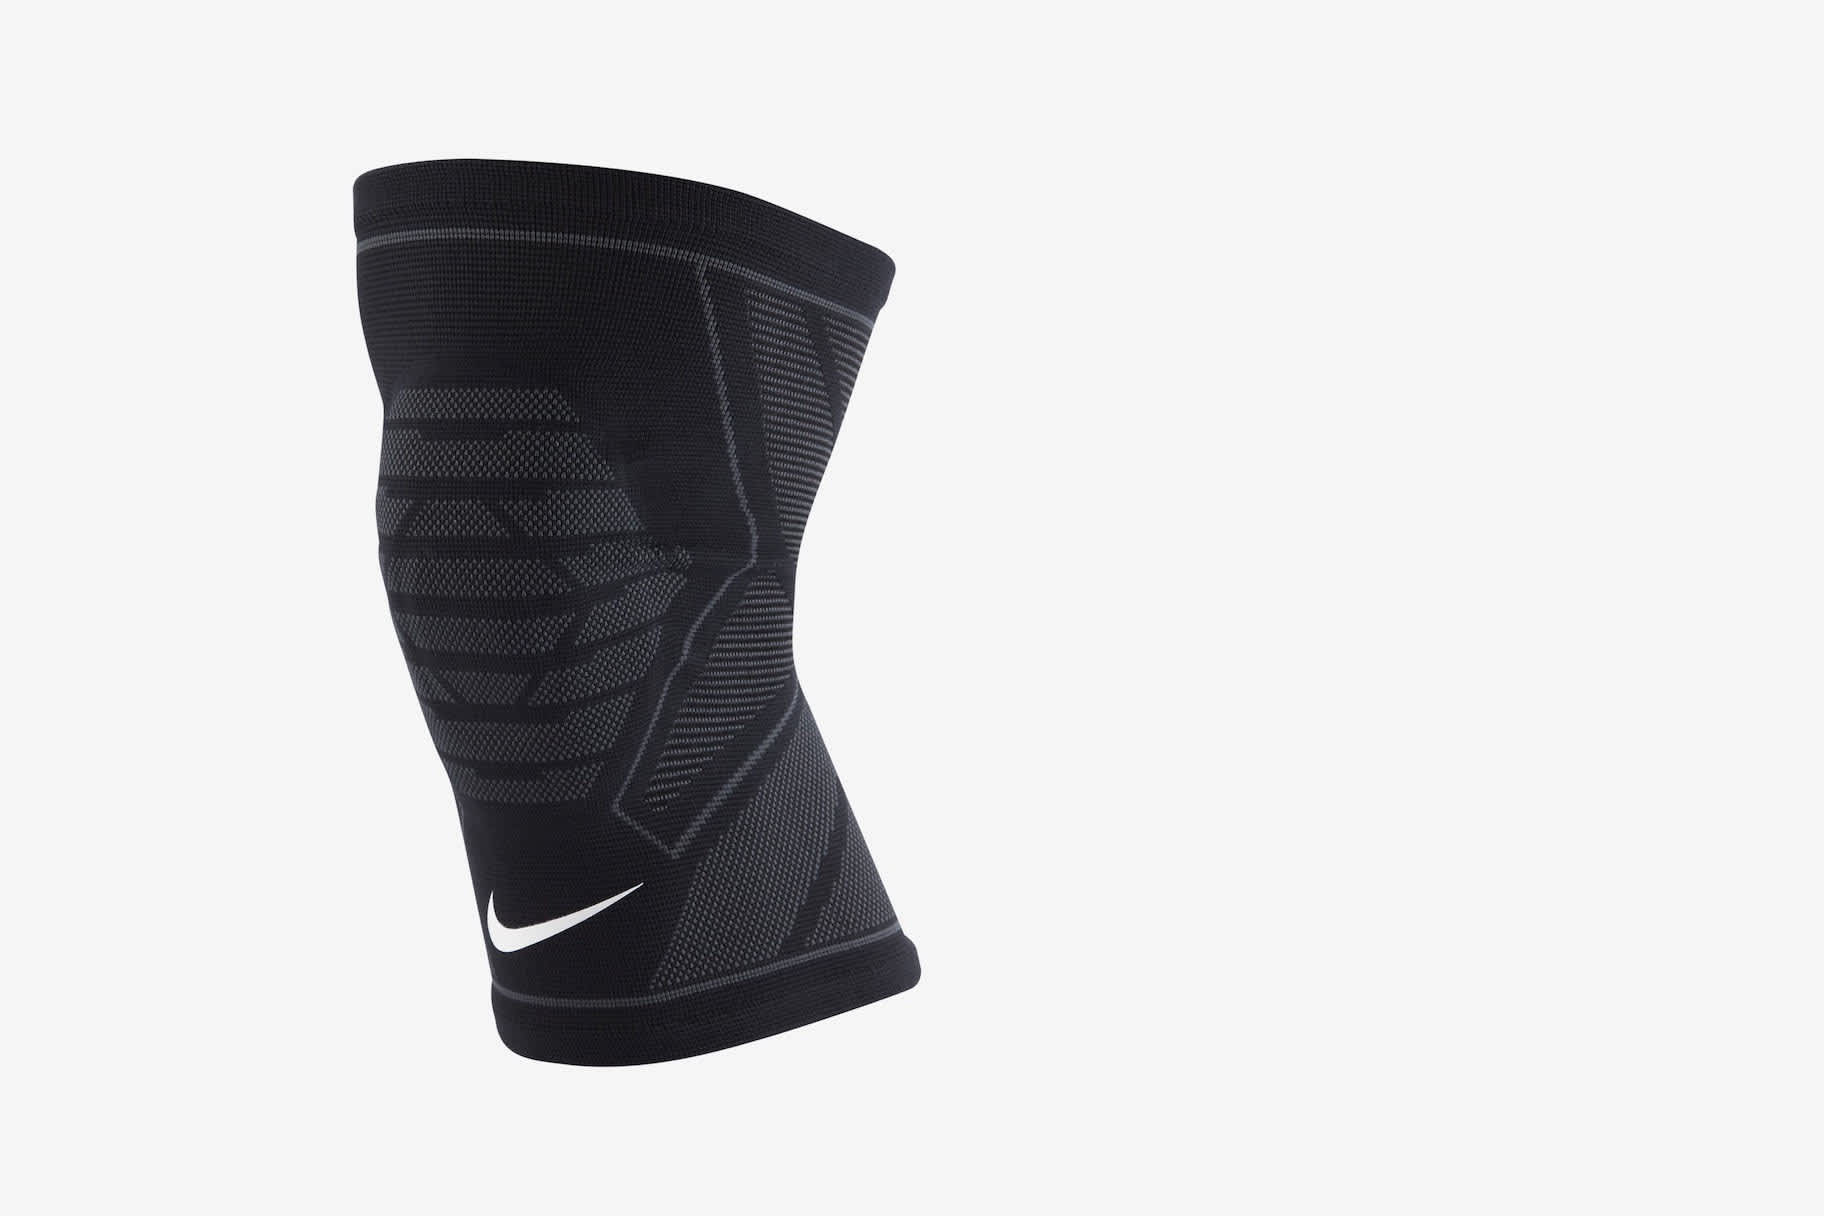 Get Extra Support for Squats with the Right Knee Sleeves